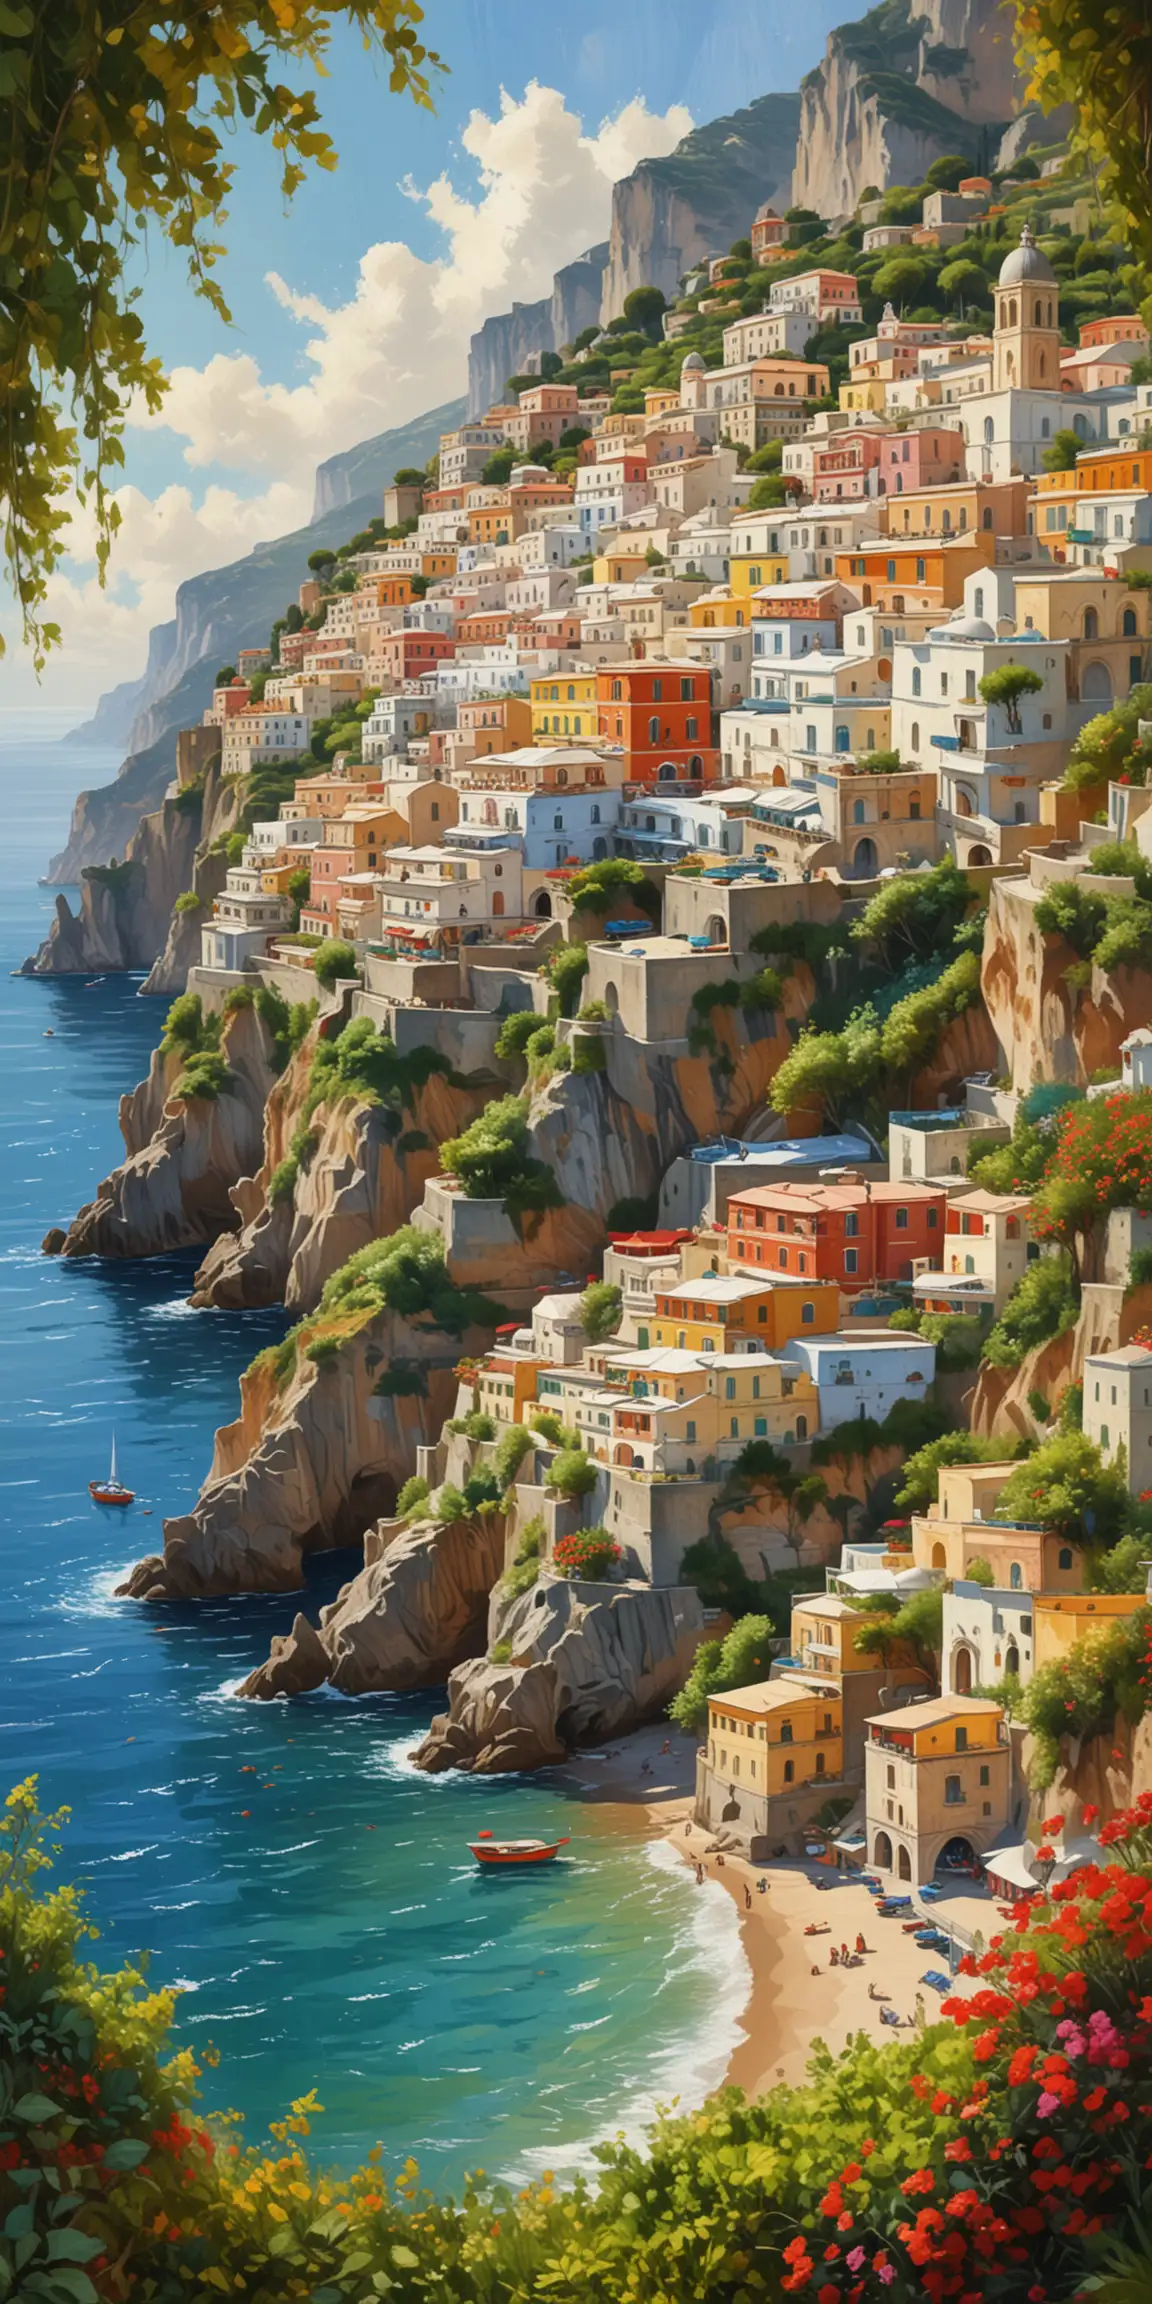 amalfi coast, oil painting, impressionist style, sunny day, colorful buildings and domes overlooking the sea with sailboats in background, lush greenery on cliffs, vibrant colors, detailed brushstrokes, textured canvas effect, impressionistic technique, high resolution --ar 1:2 --stylize 750